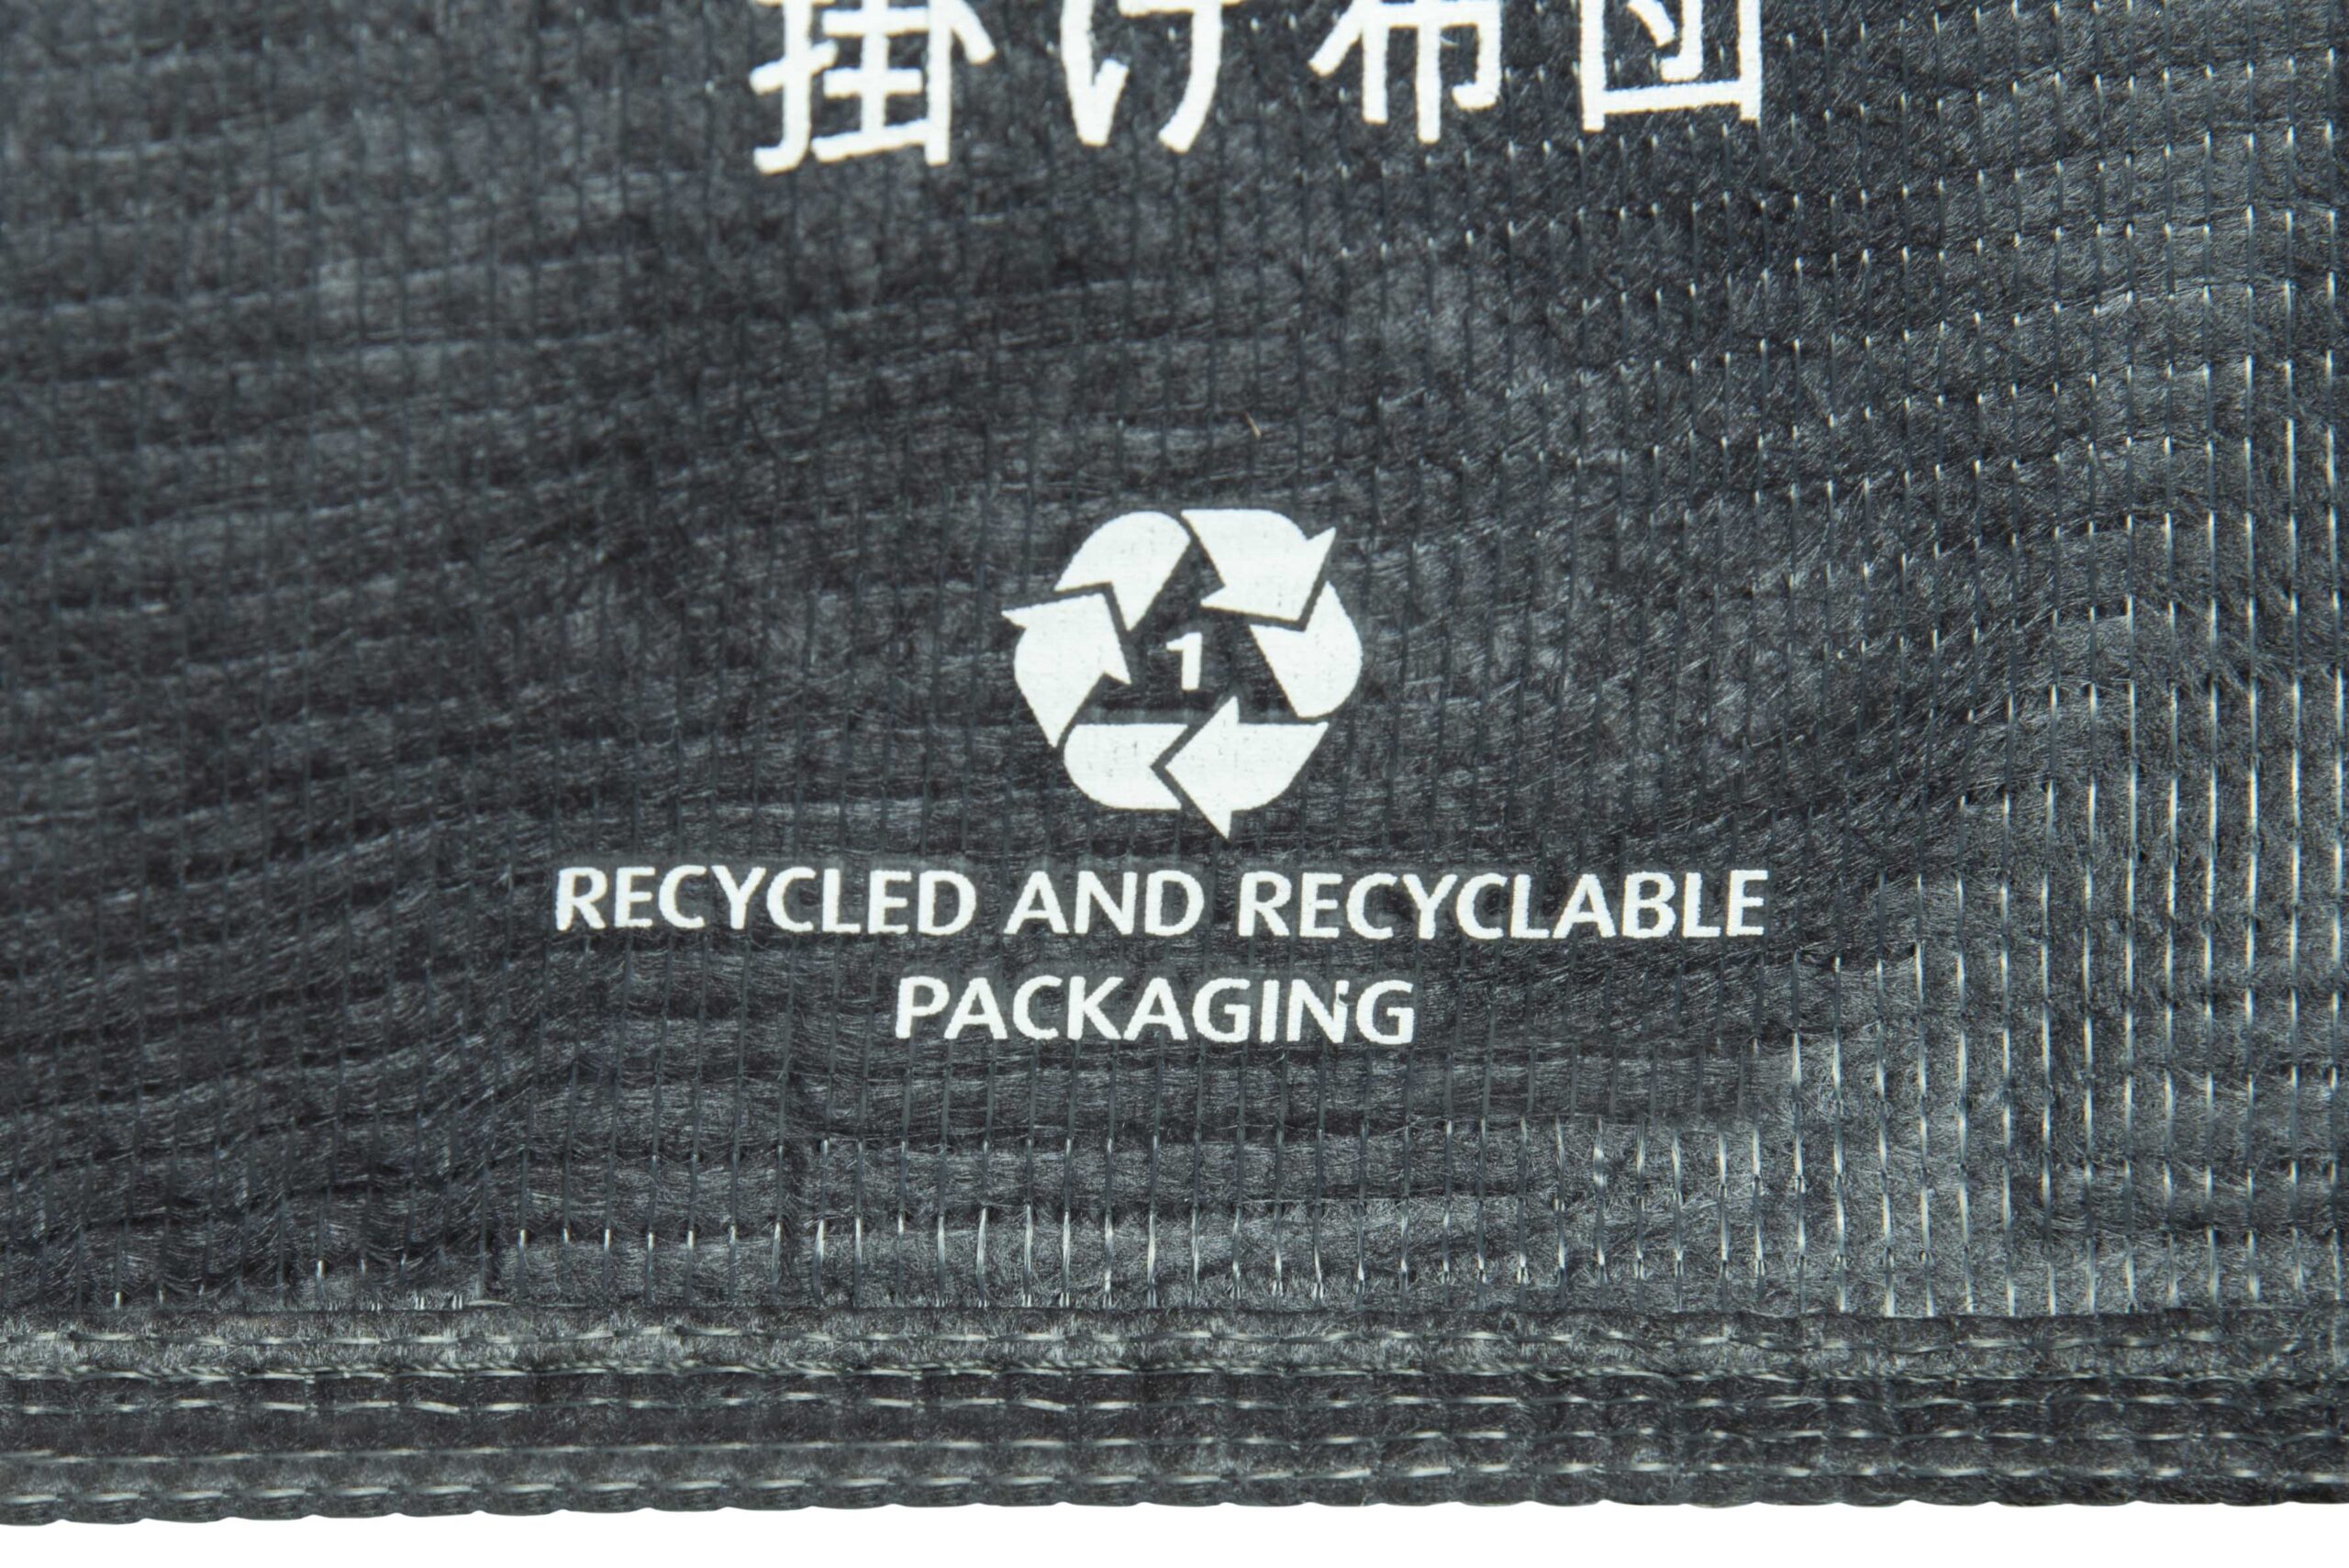 SP Packaging - Bedding & textiles